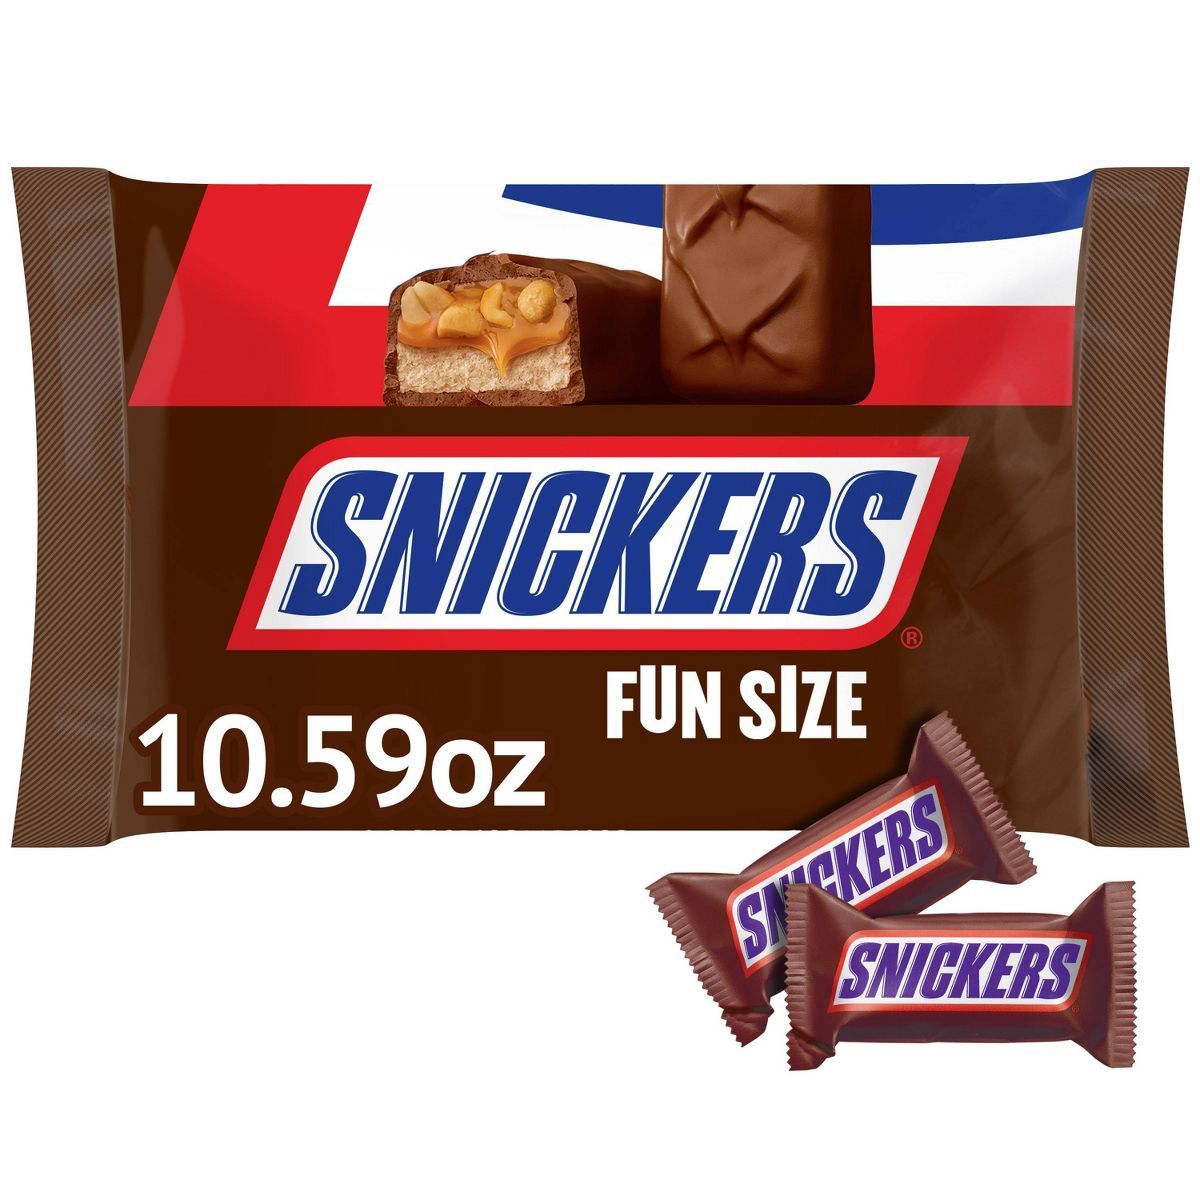 Snickers Fun Size Chocolate Candy Bars - 10.59oz | Target